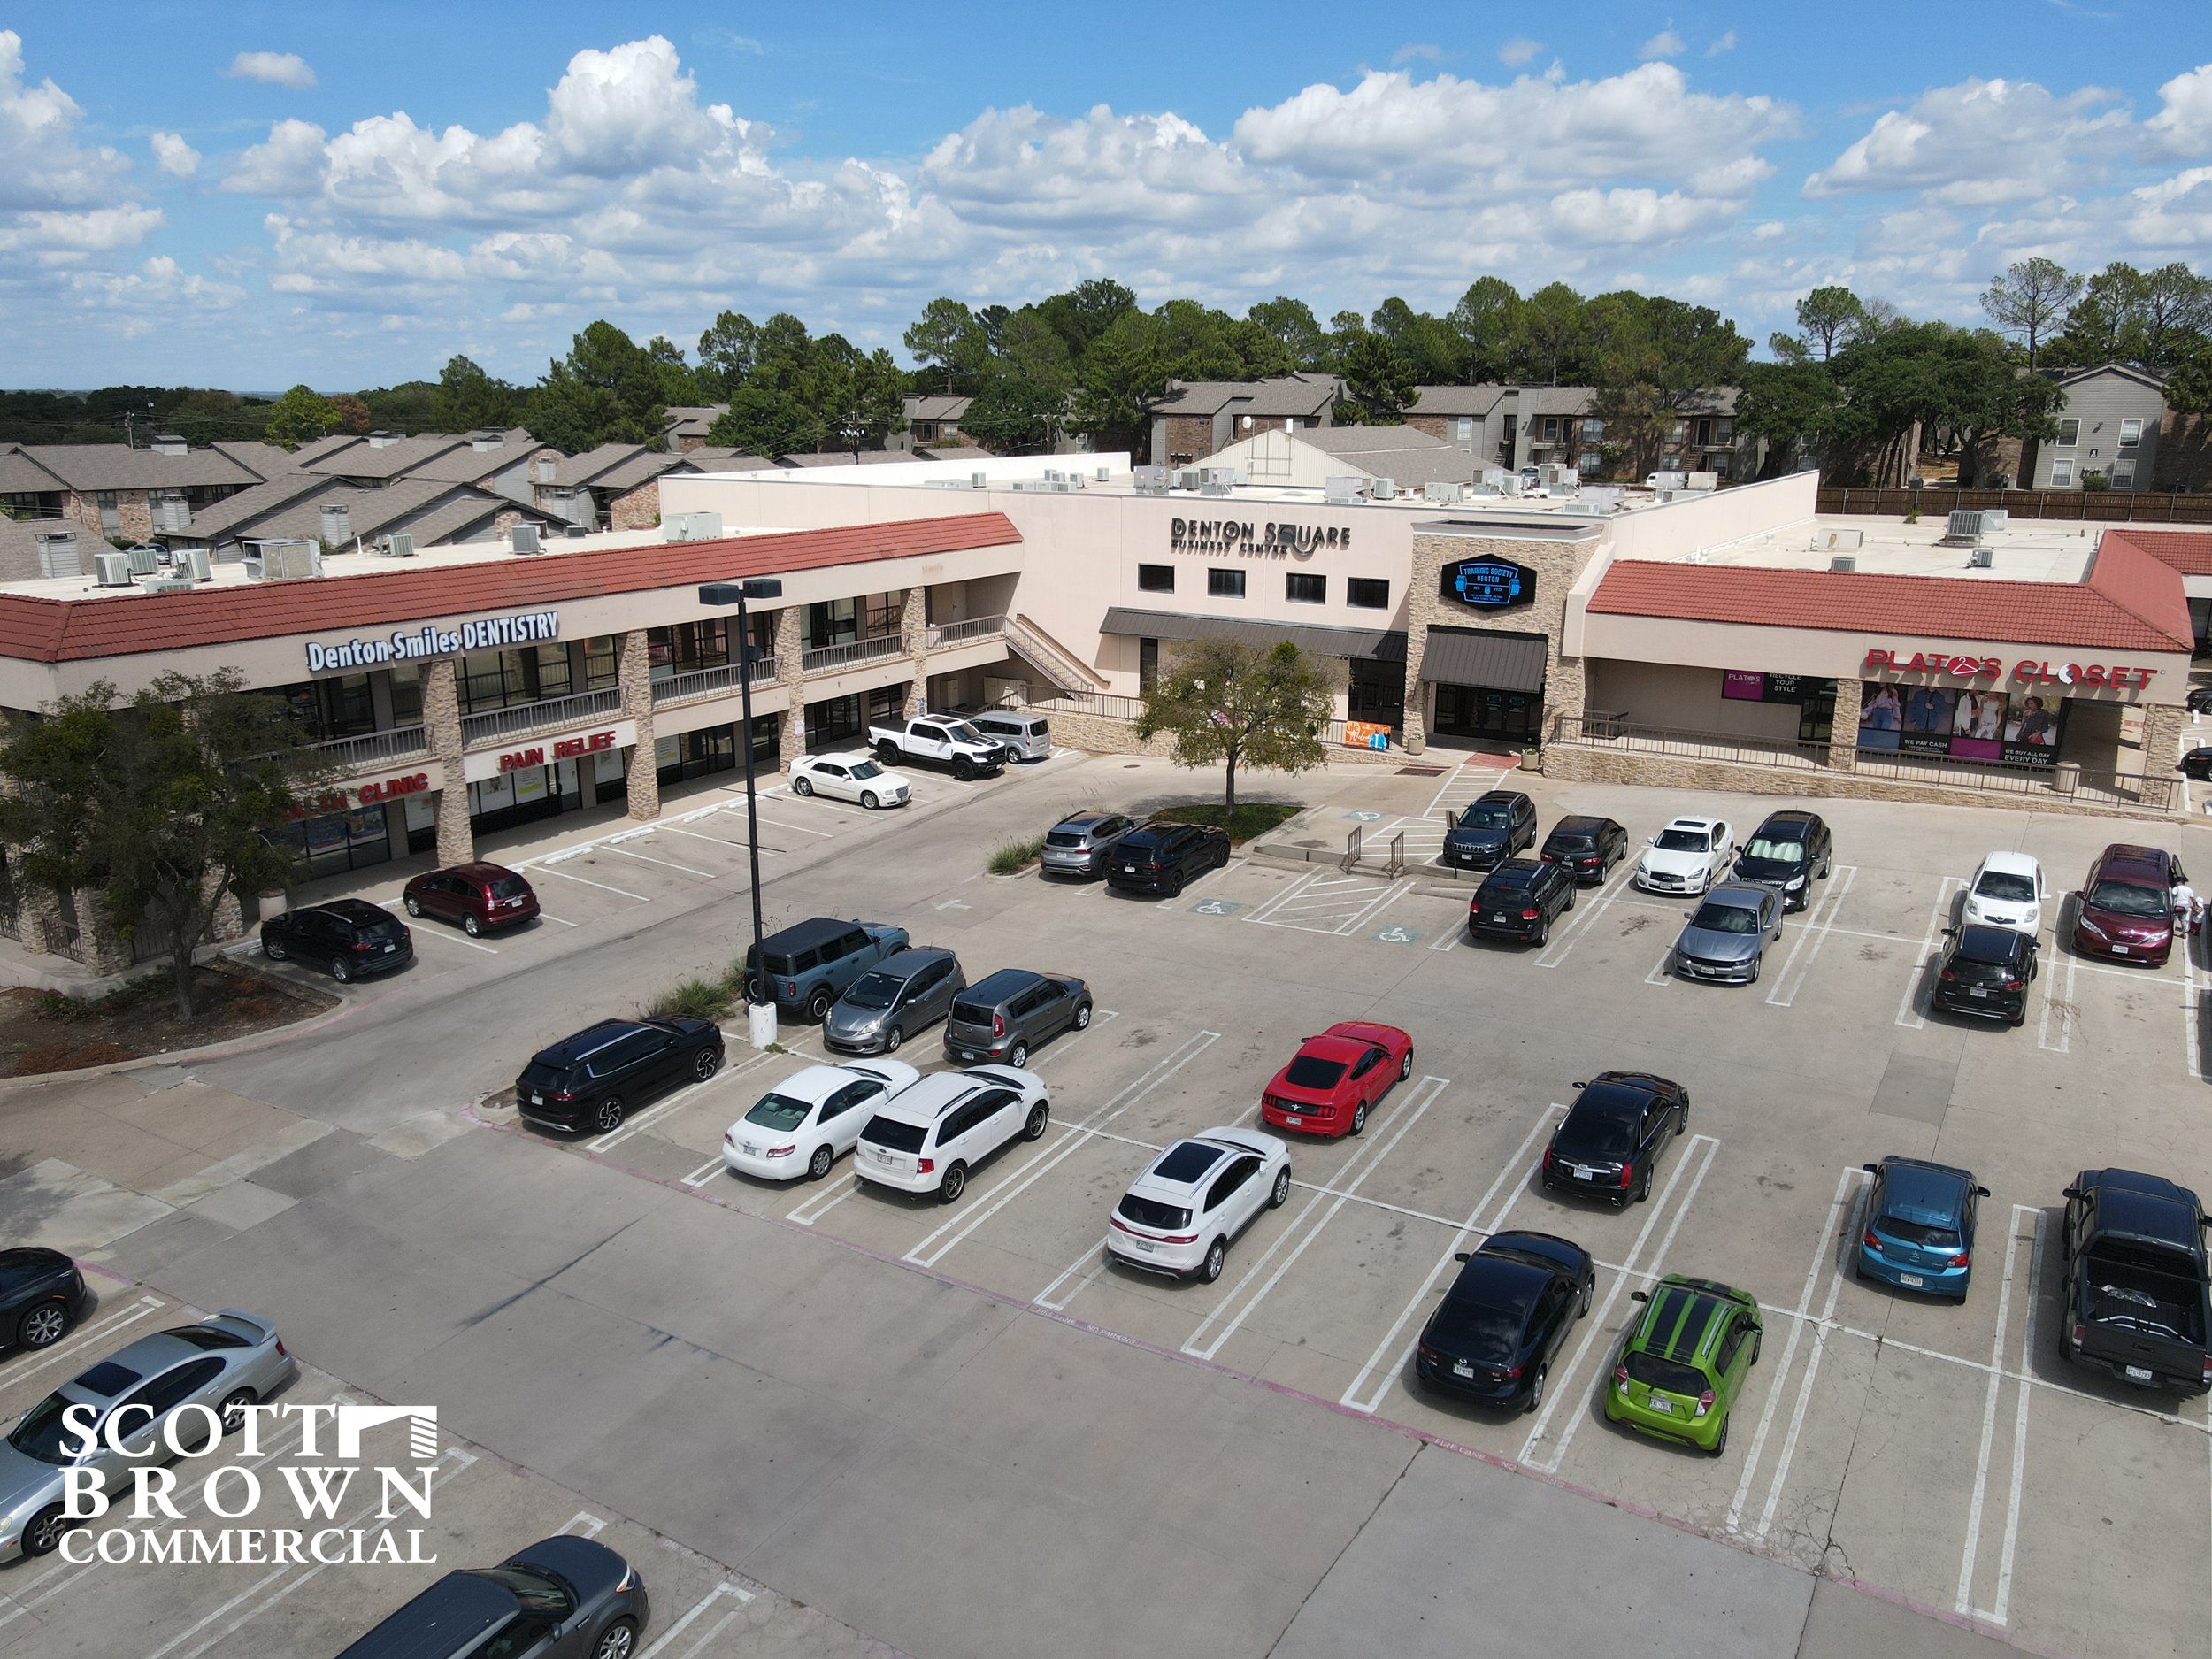  view of the Denton Square Business Center from drone height from across the parking lot 